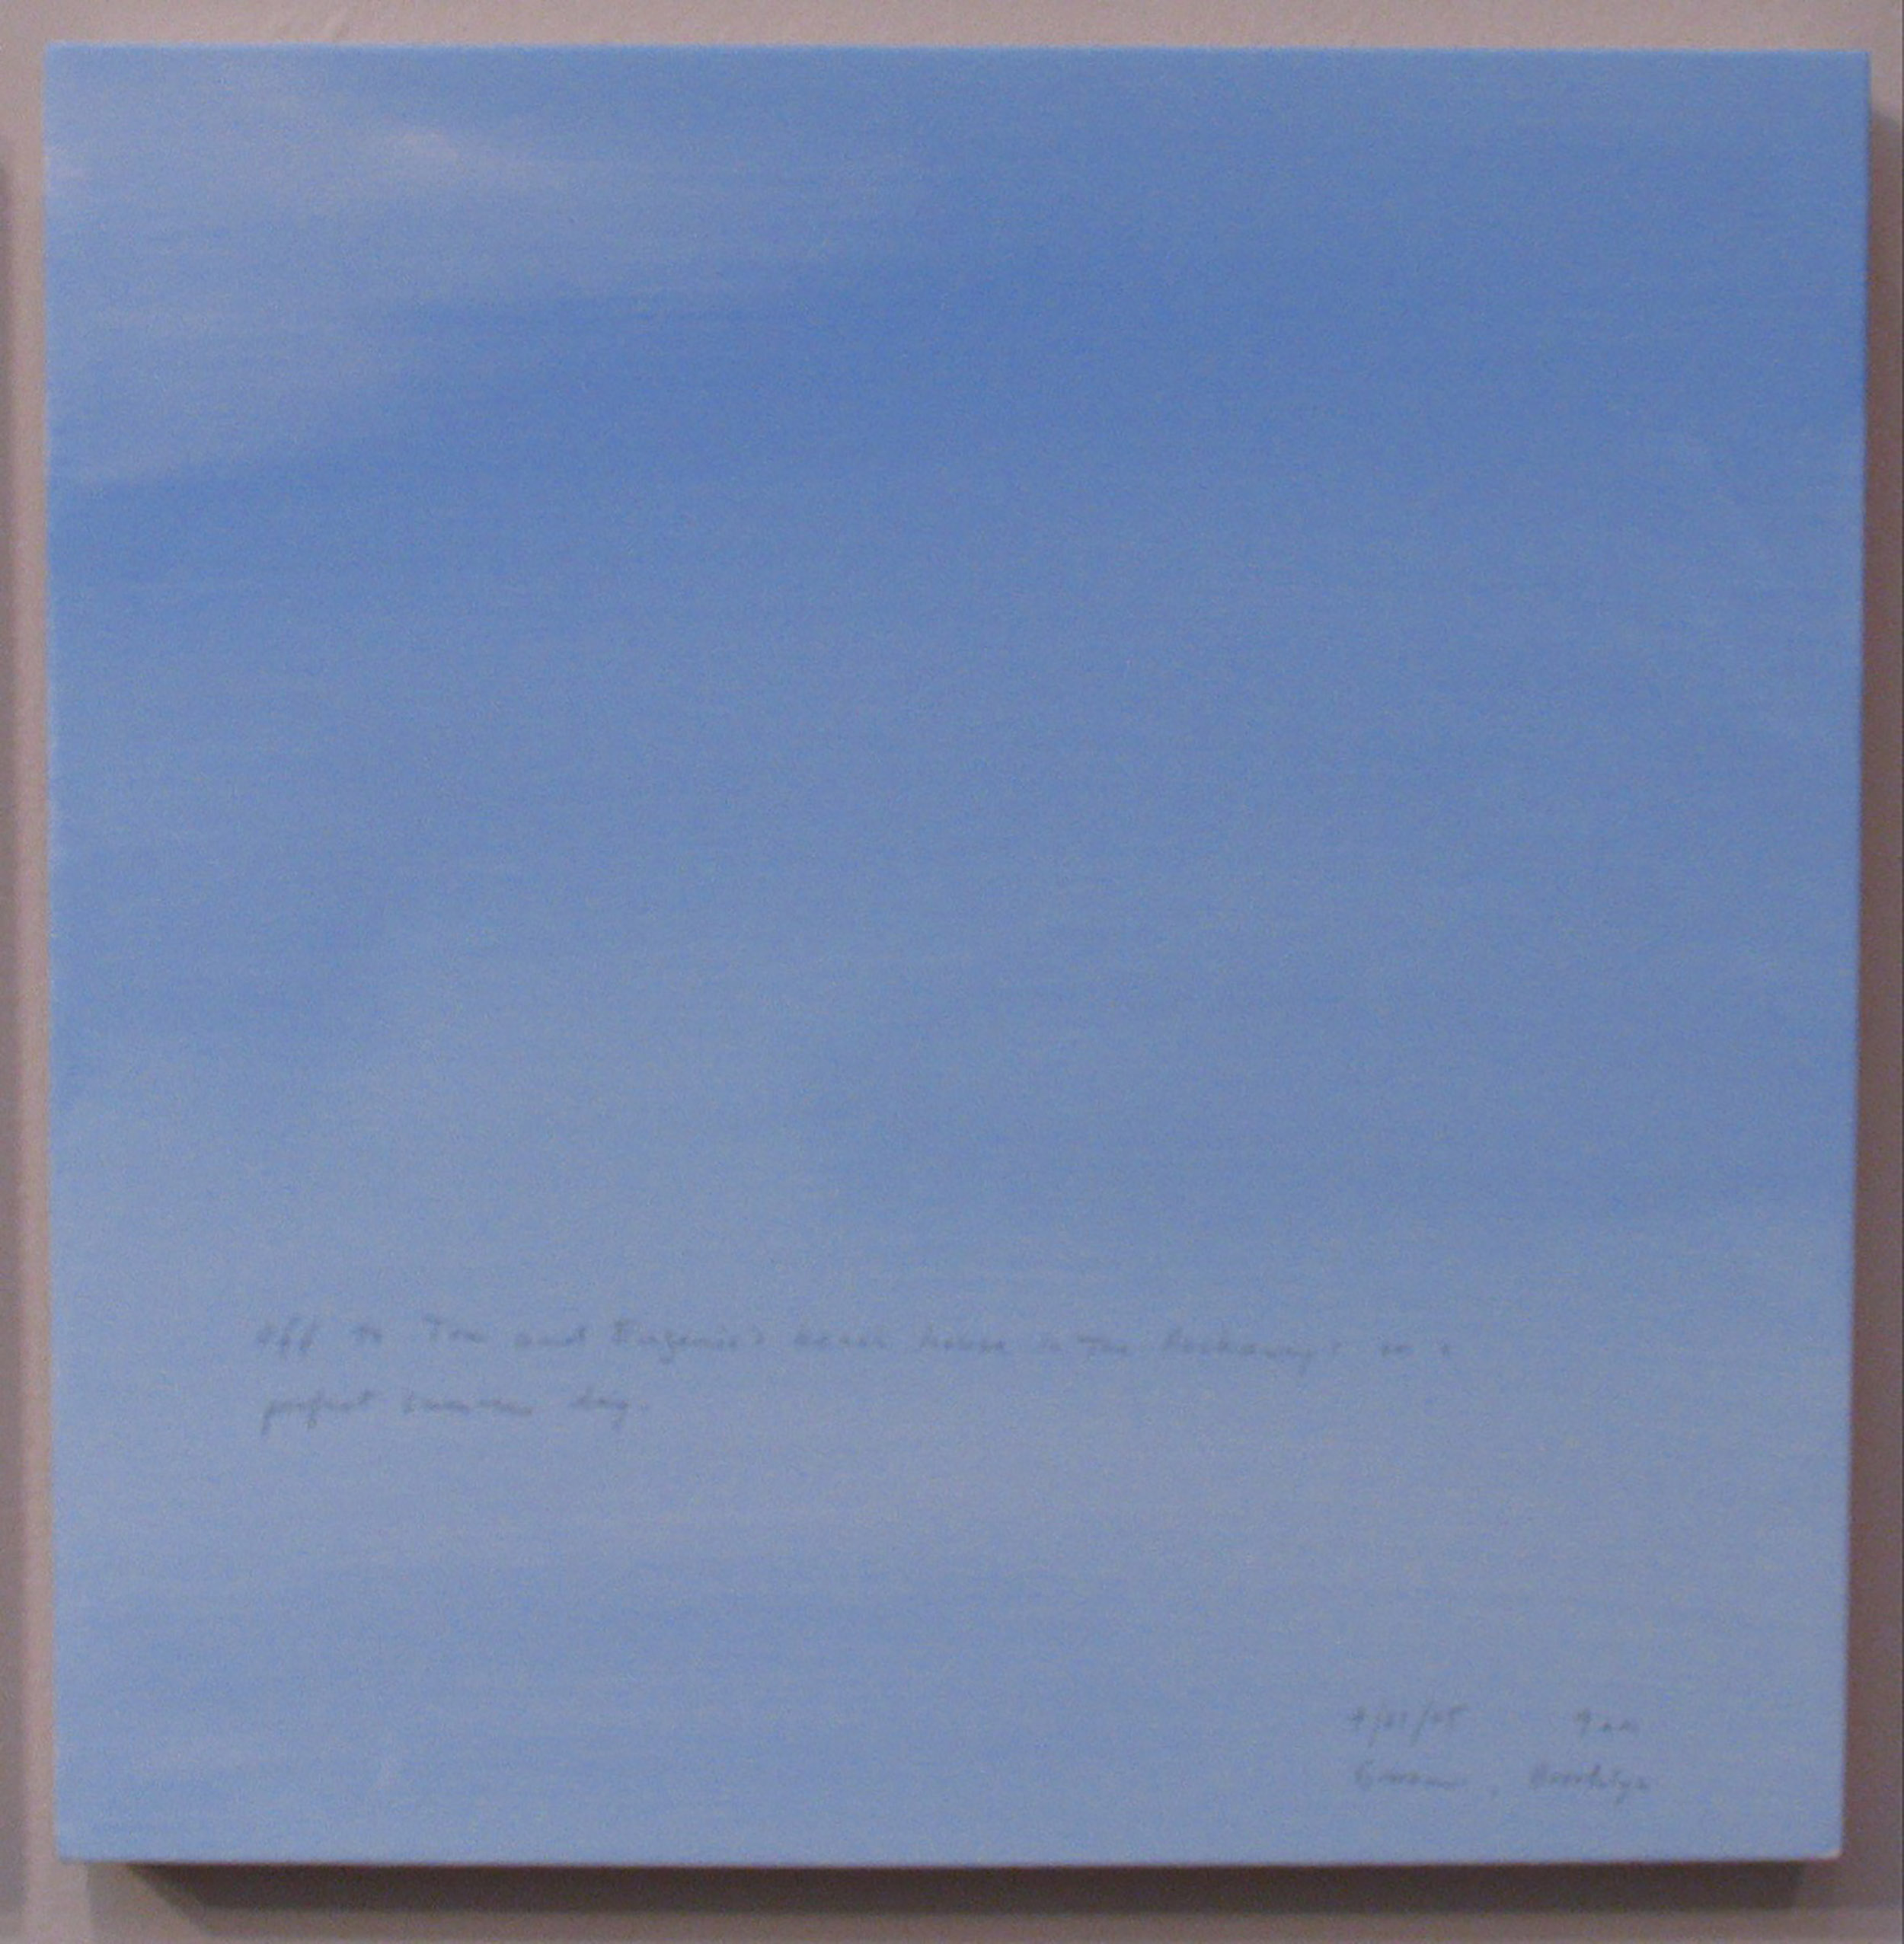 A 14 × 14 inch, acrylic painting of the sky. A journal entry is handwritten on the painting:

“Off to Tom and Eugenie’s beach house in the Rockaways on a perfect summer day.

7/31/05 9 am
Gowanus, Brooklyn”